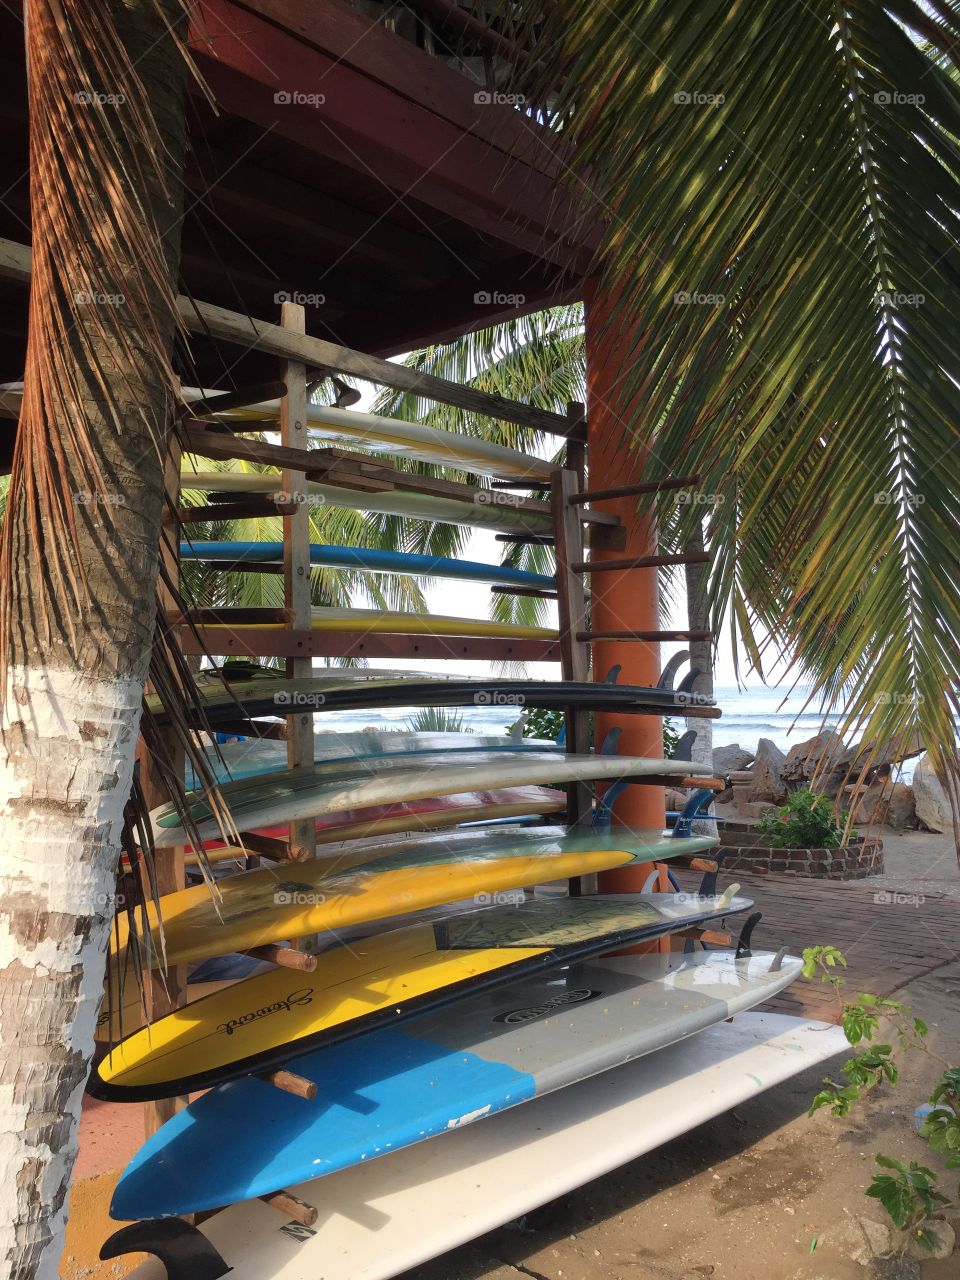 Surfboards on rack at beach